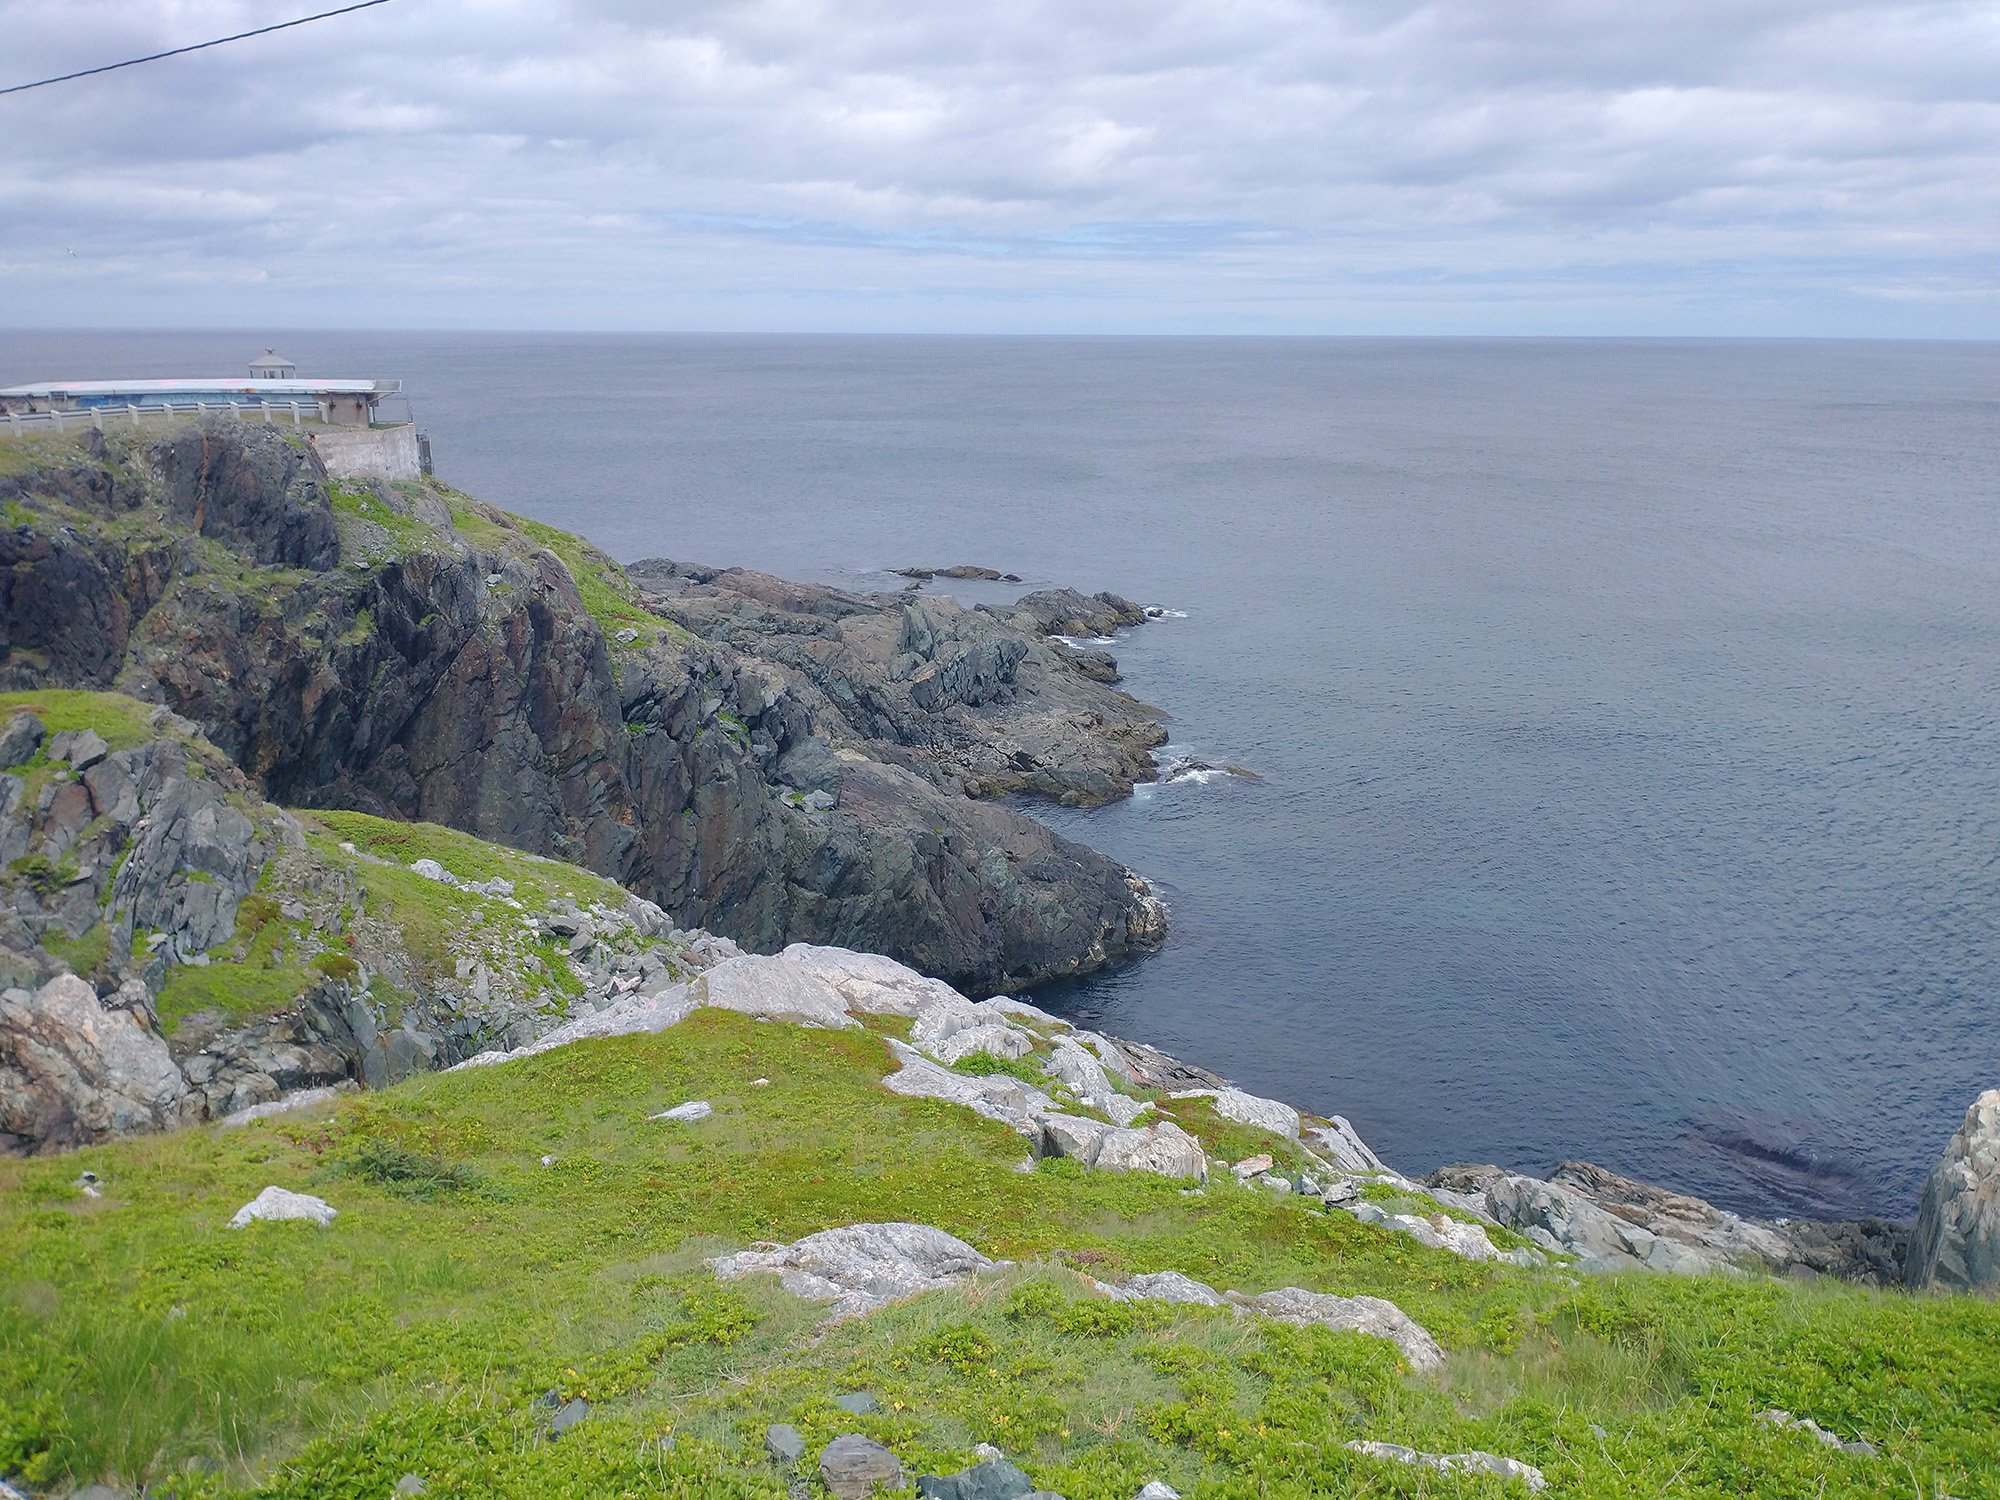 It's a tiny closed-off lighthouse, nothing special, but the area itself is stunning. It's a hiking destination more than anything else. Not meant for... a road bike lol